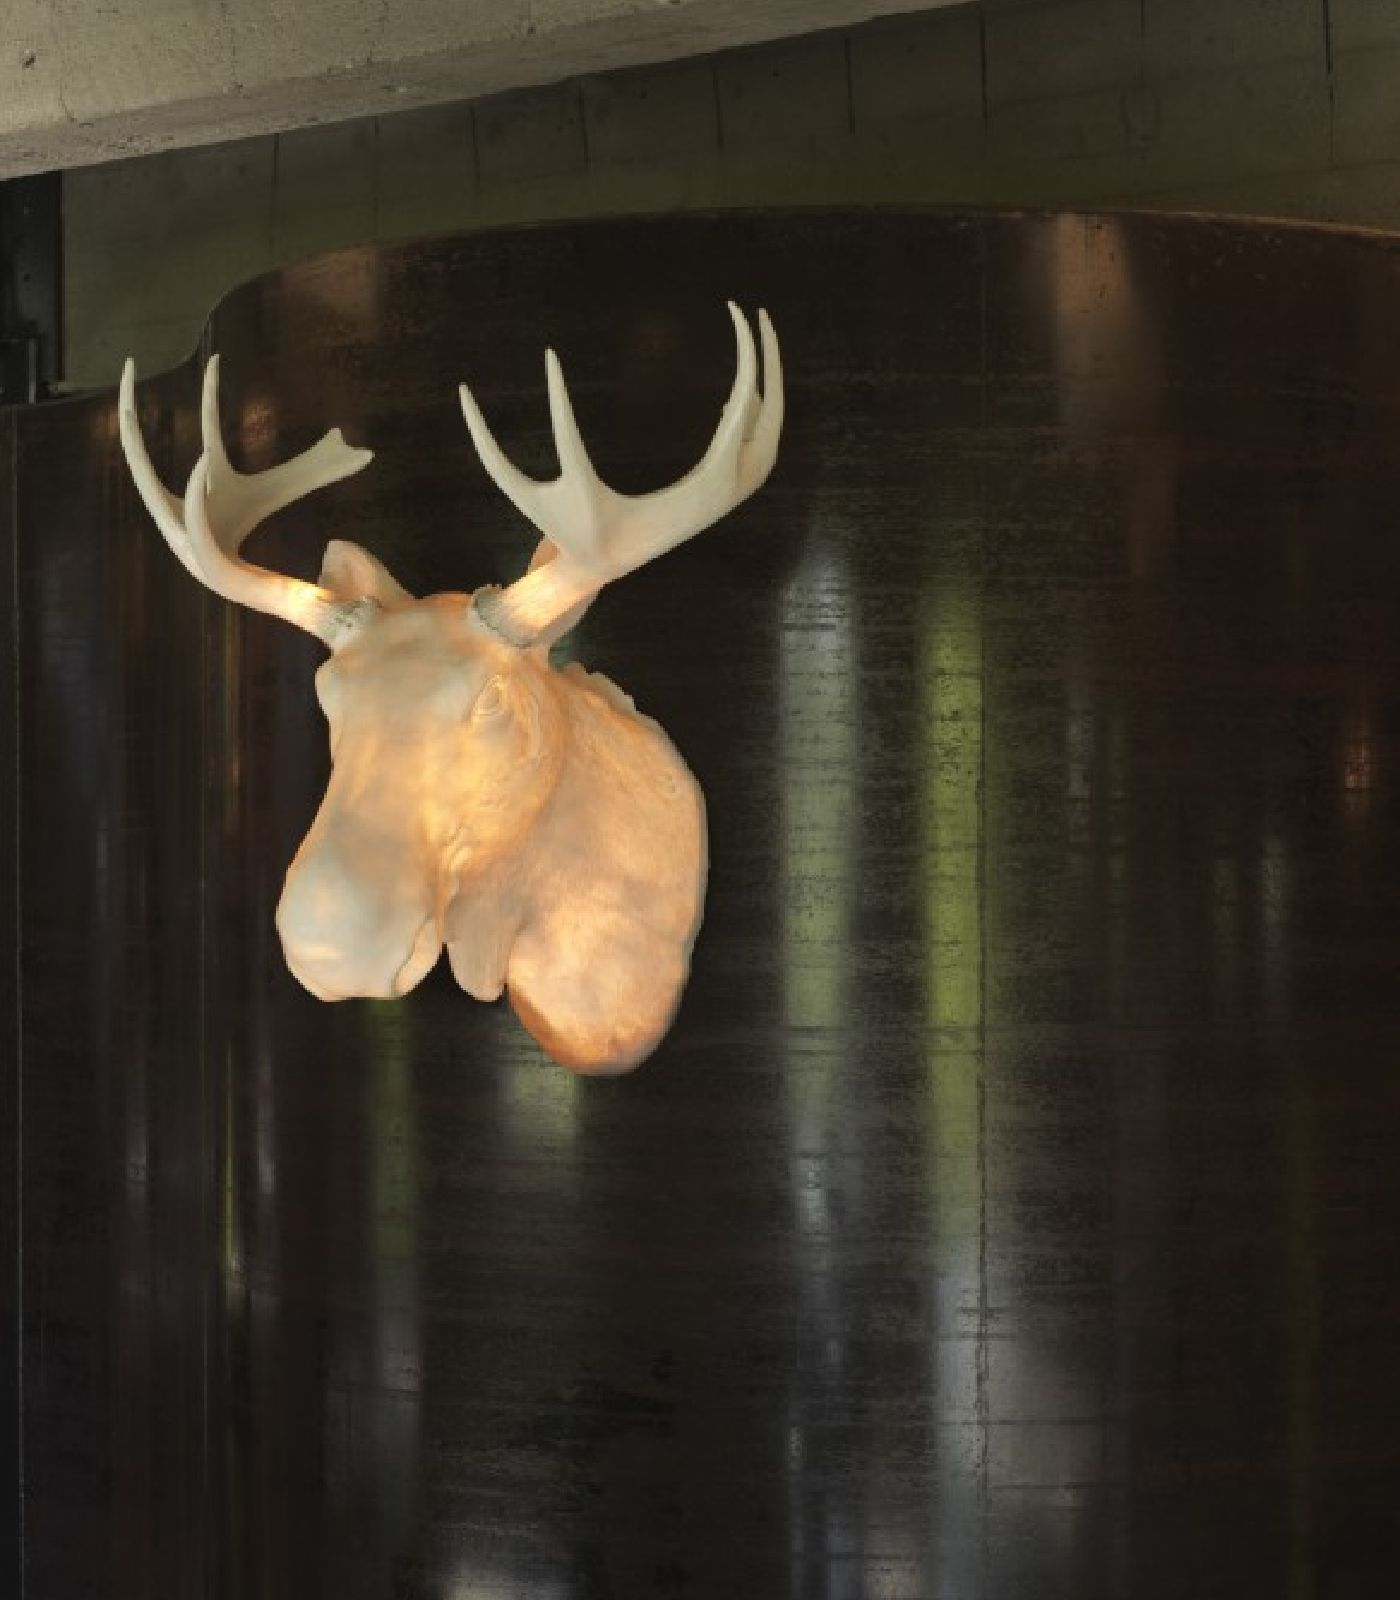 Add Moose Lighting : How to Add Moose Lighting to Your Home Decor for a Cozy and Rustic Atmosphere